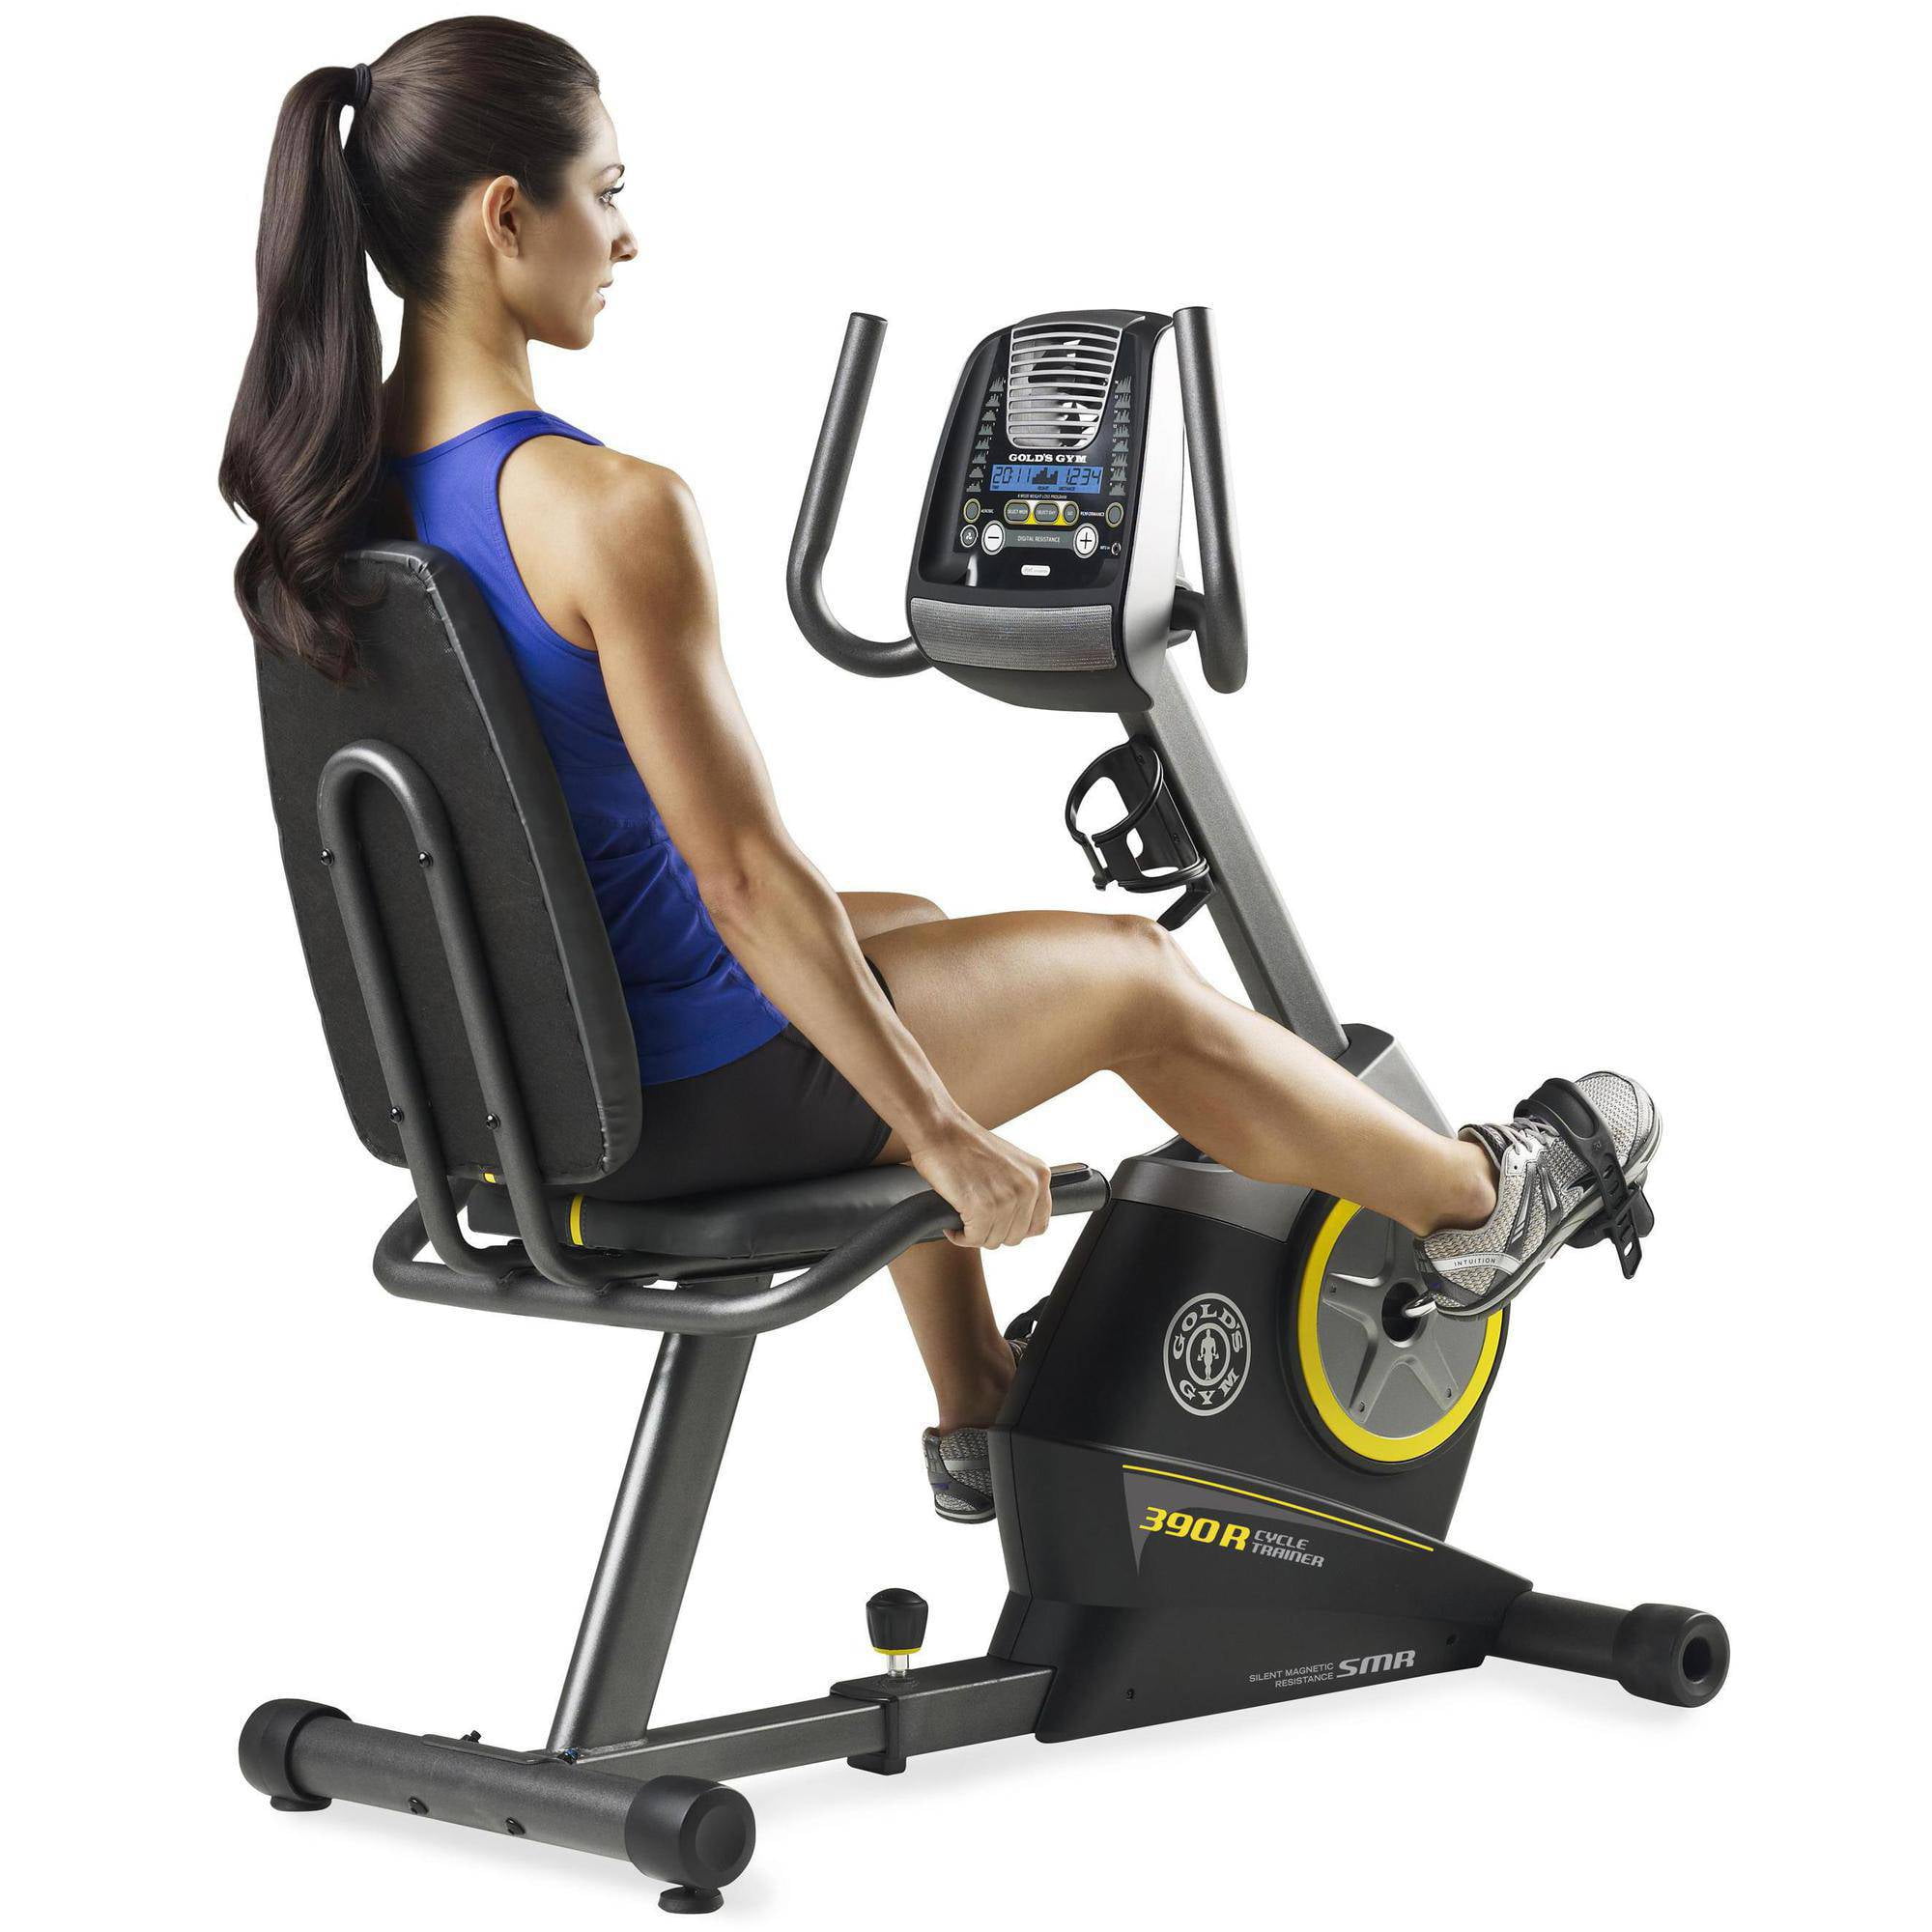 390r cycle trainer